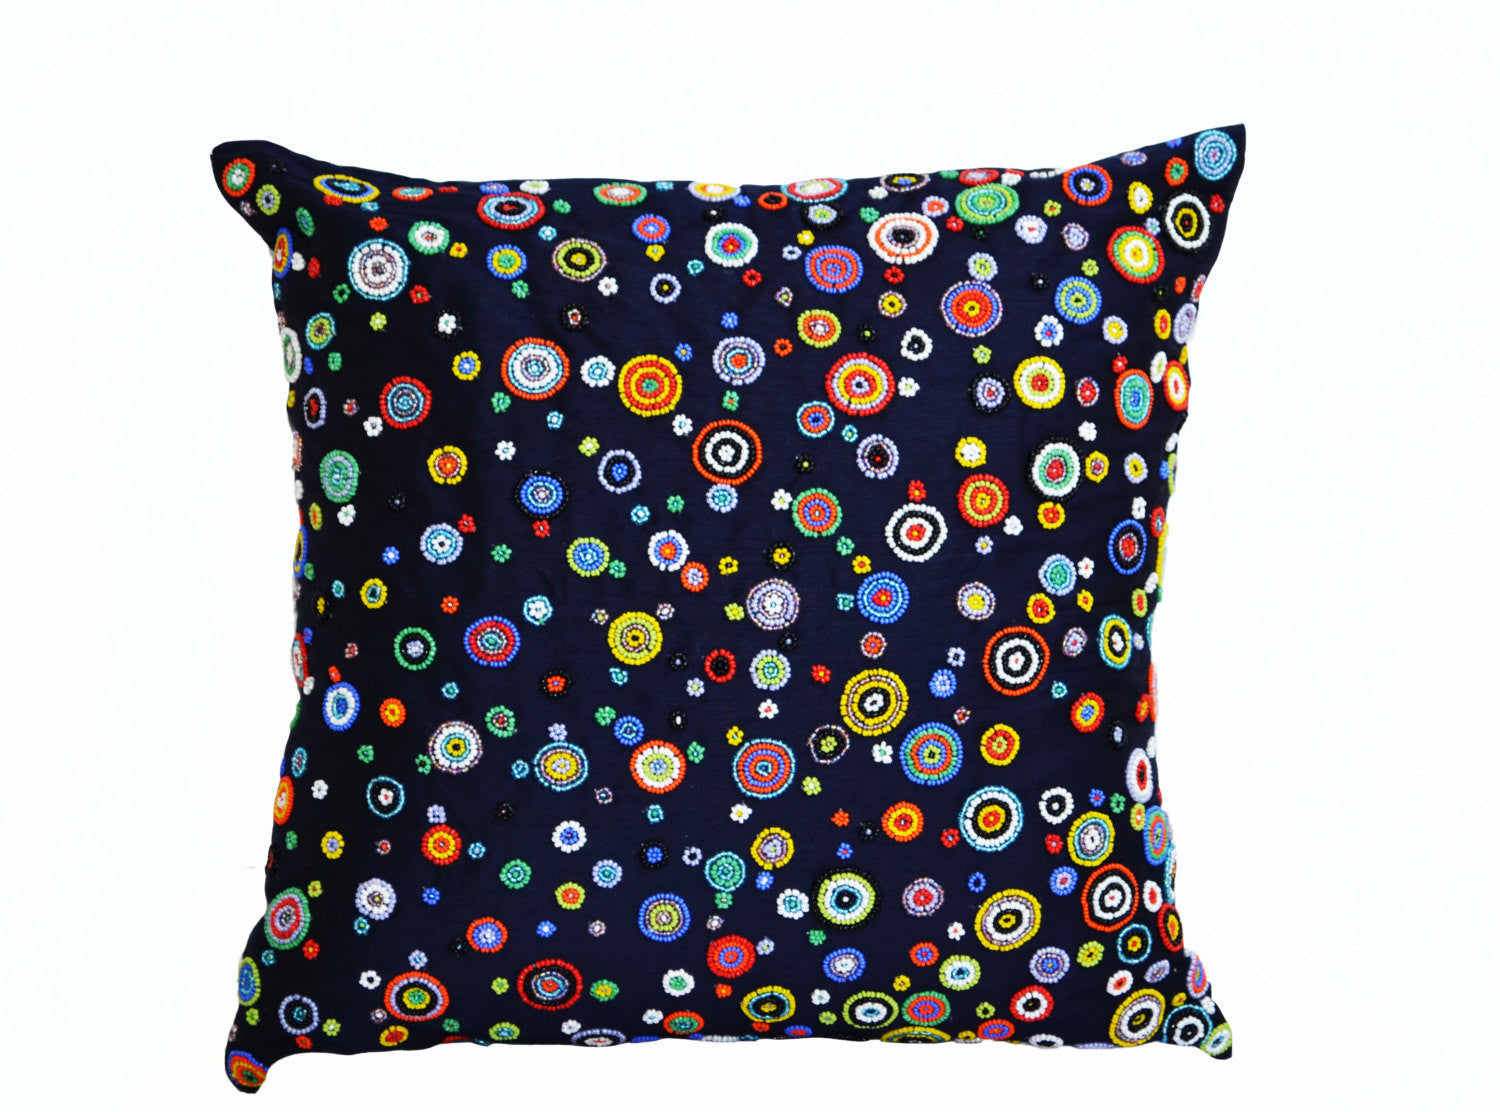 Handmade art inspired navy blue pillows with colorful beads